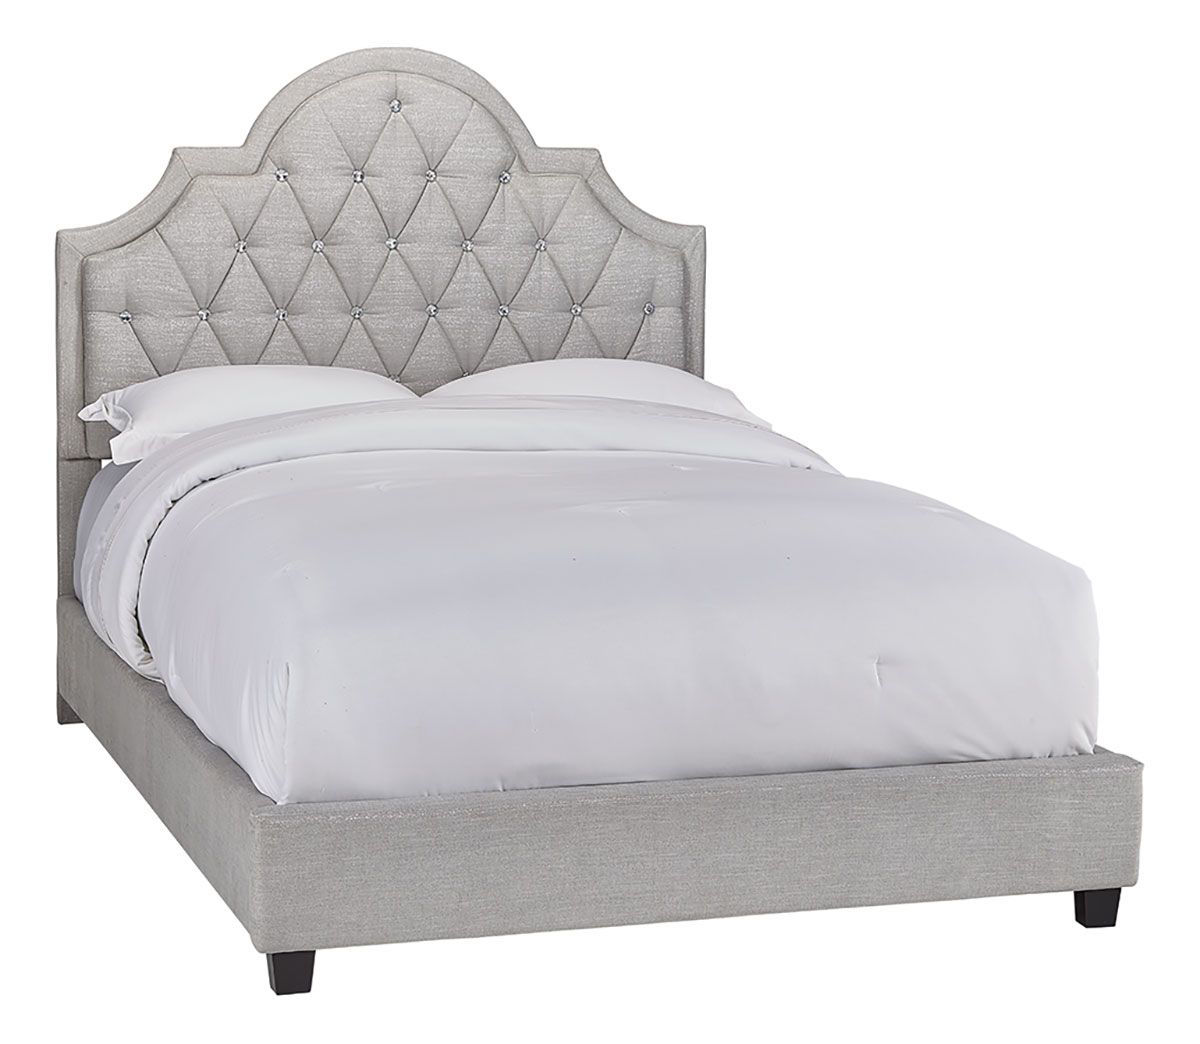 Belle Complete Twin Bed Bad Home, Twin Bed Board